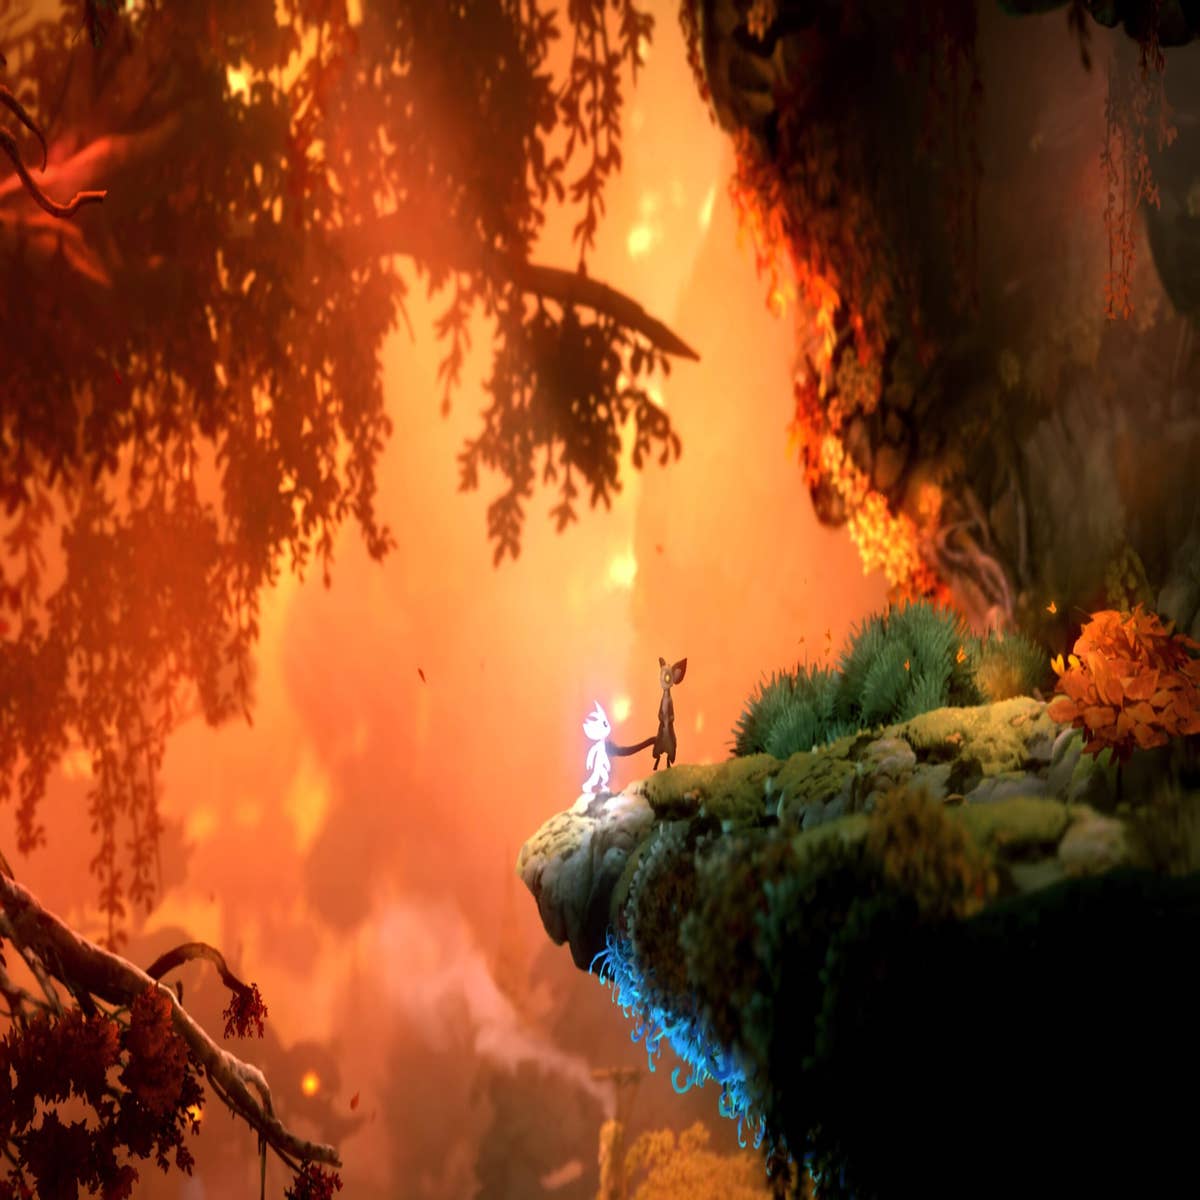 Ori and the Will of the Wisps Dev Talks Difficulty Creating Switch Port